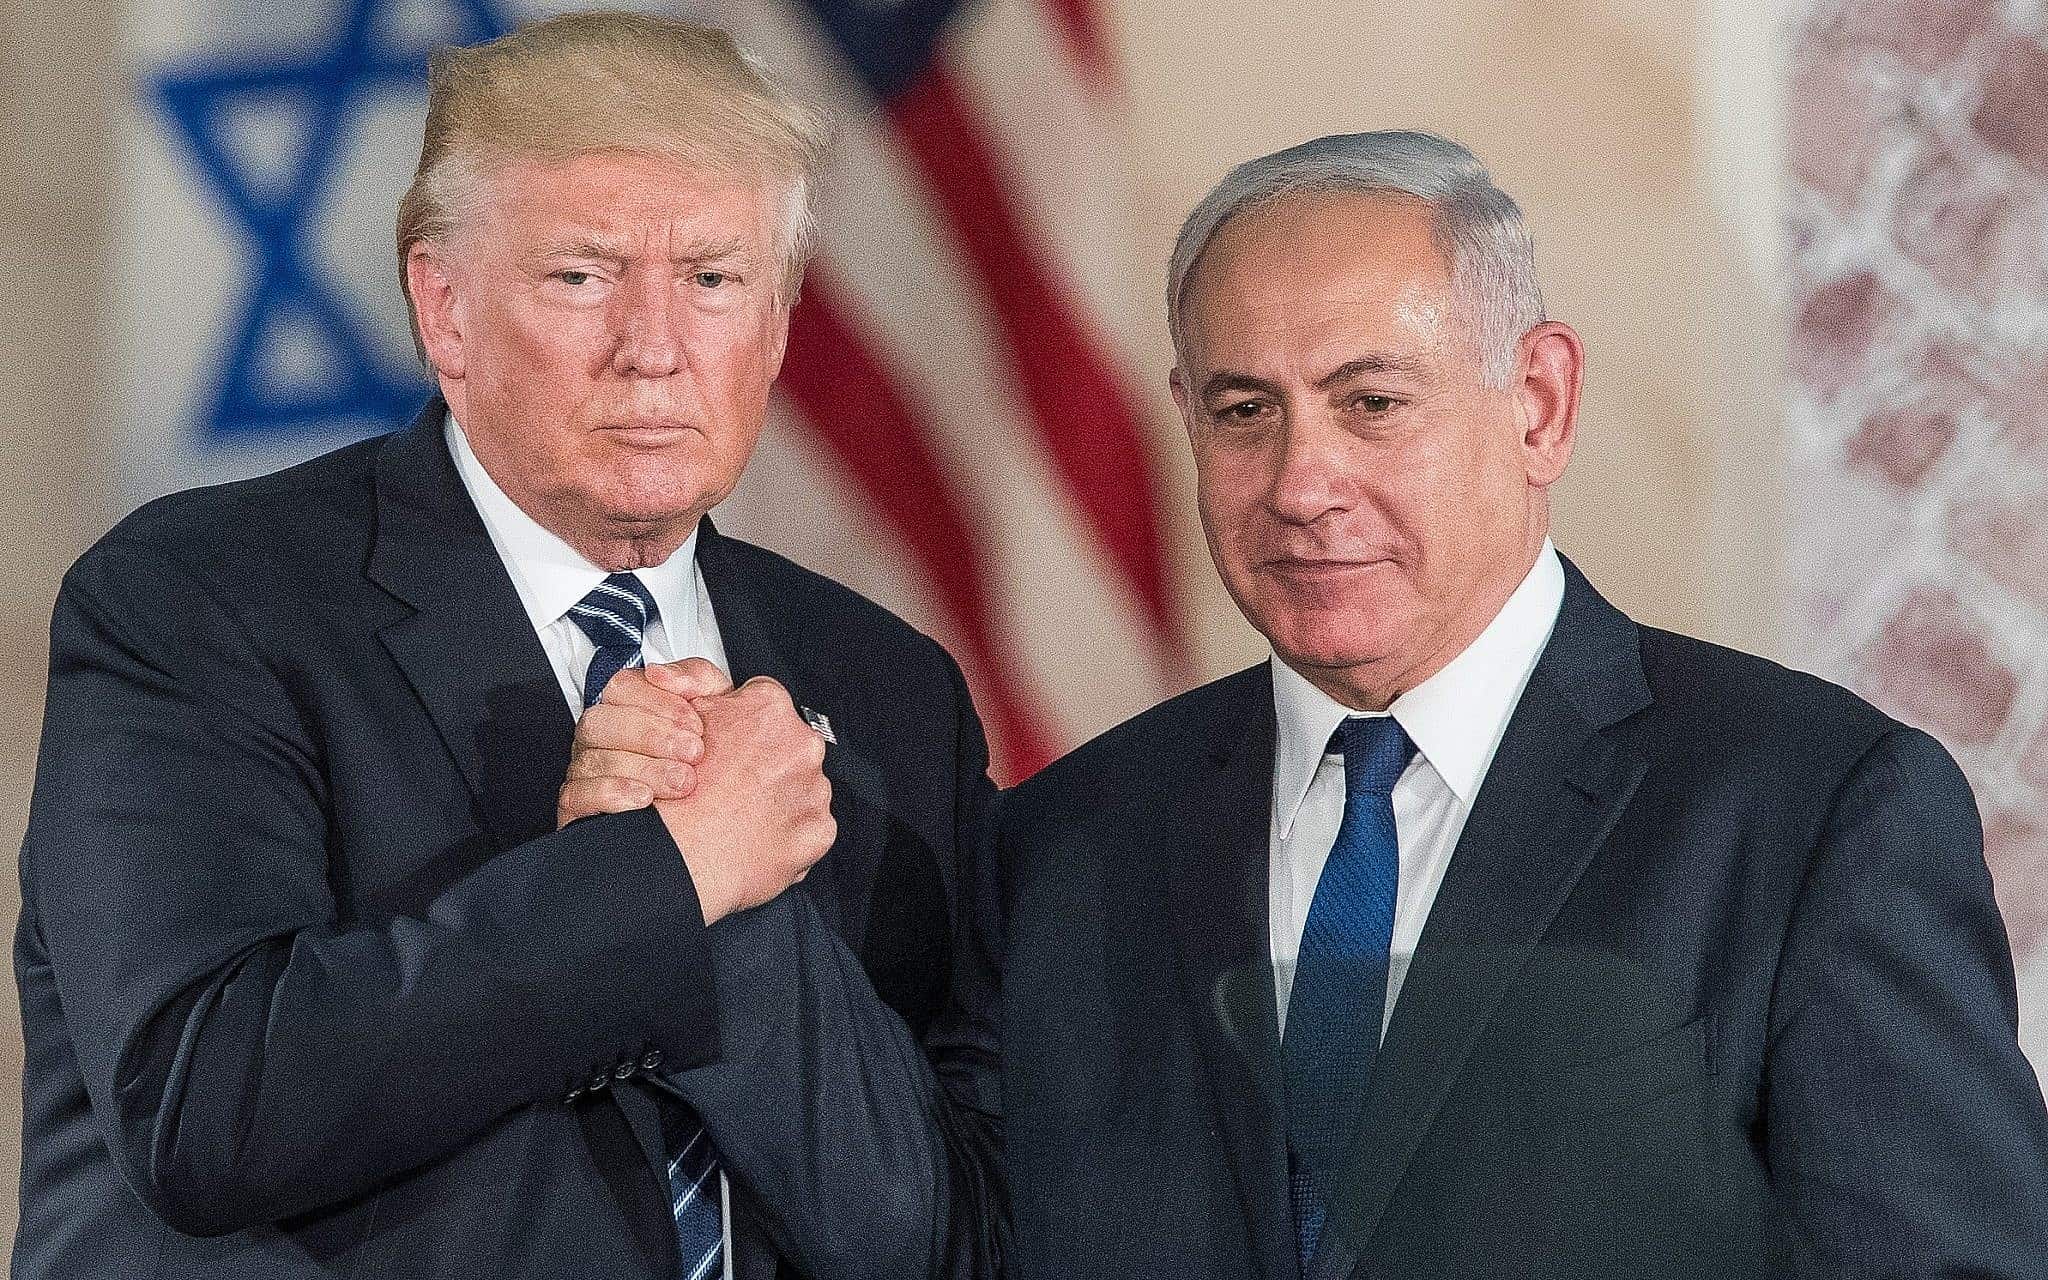 Trump administration declares that the US no longer considers “the establishment of Israeli civilian settlements inconsistent with international law”